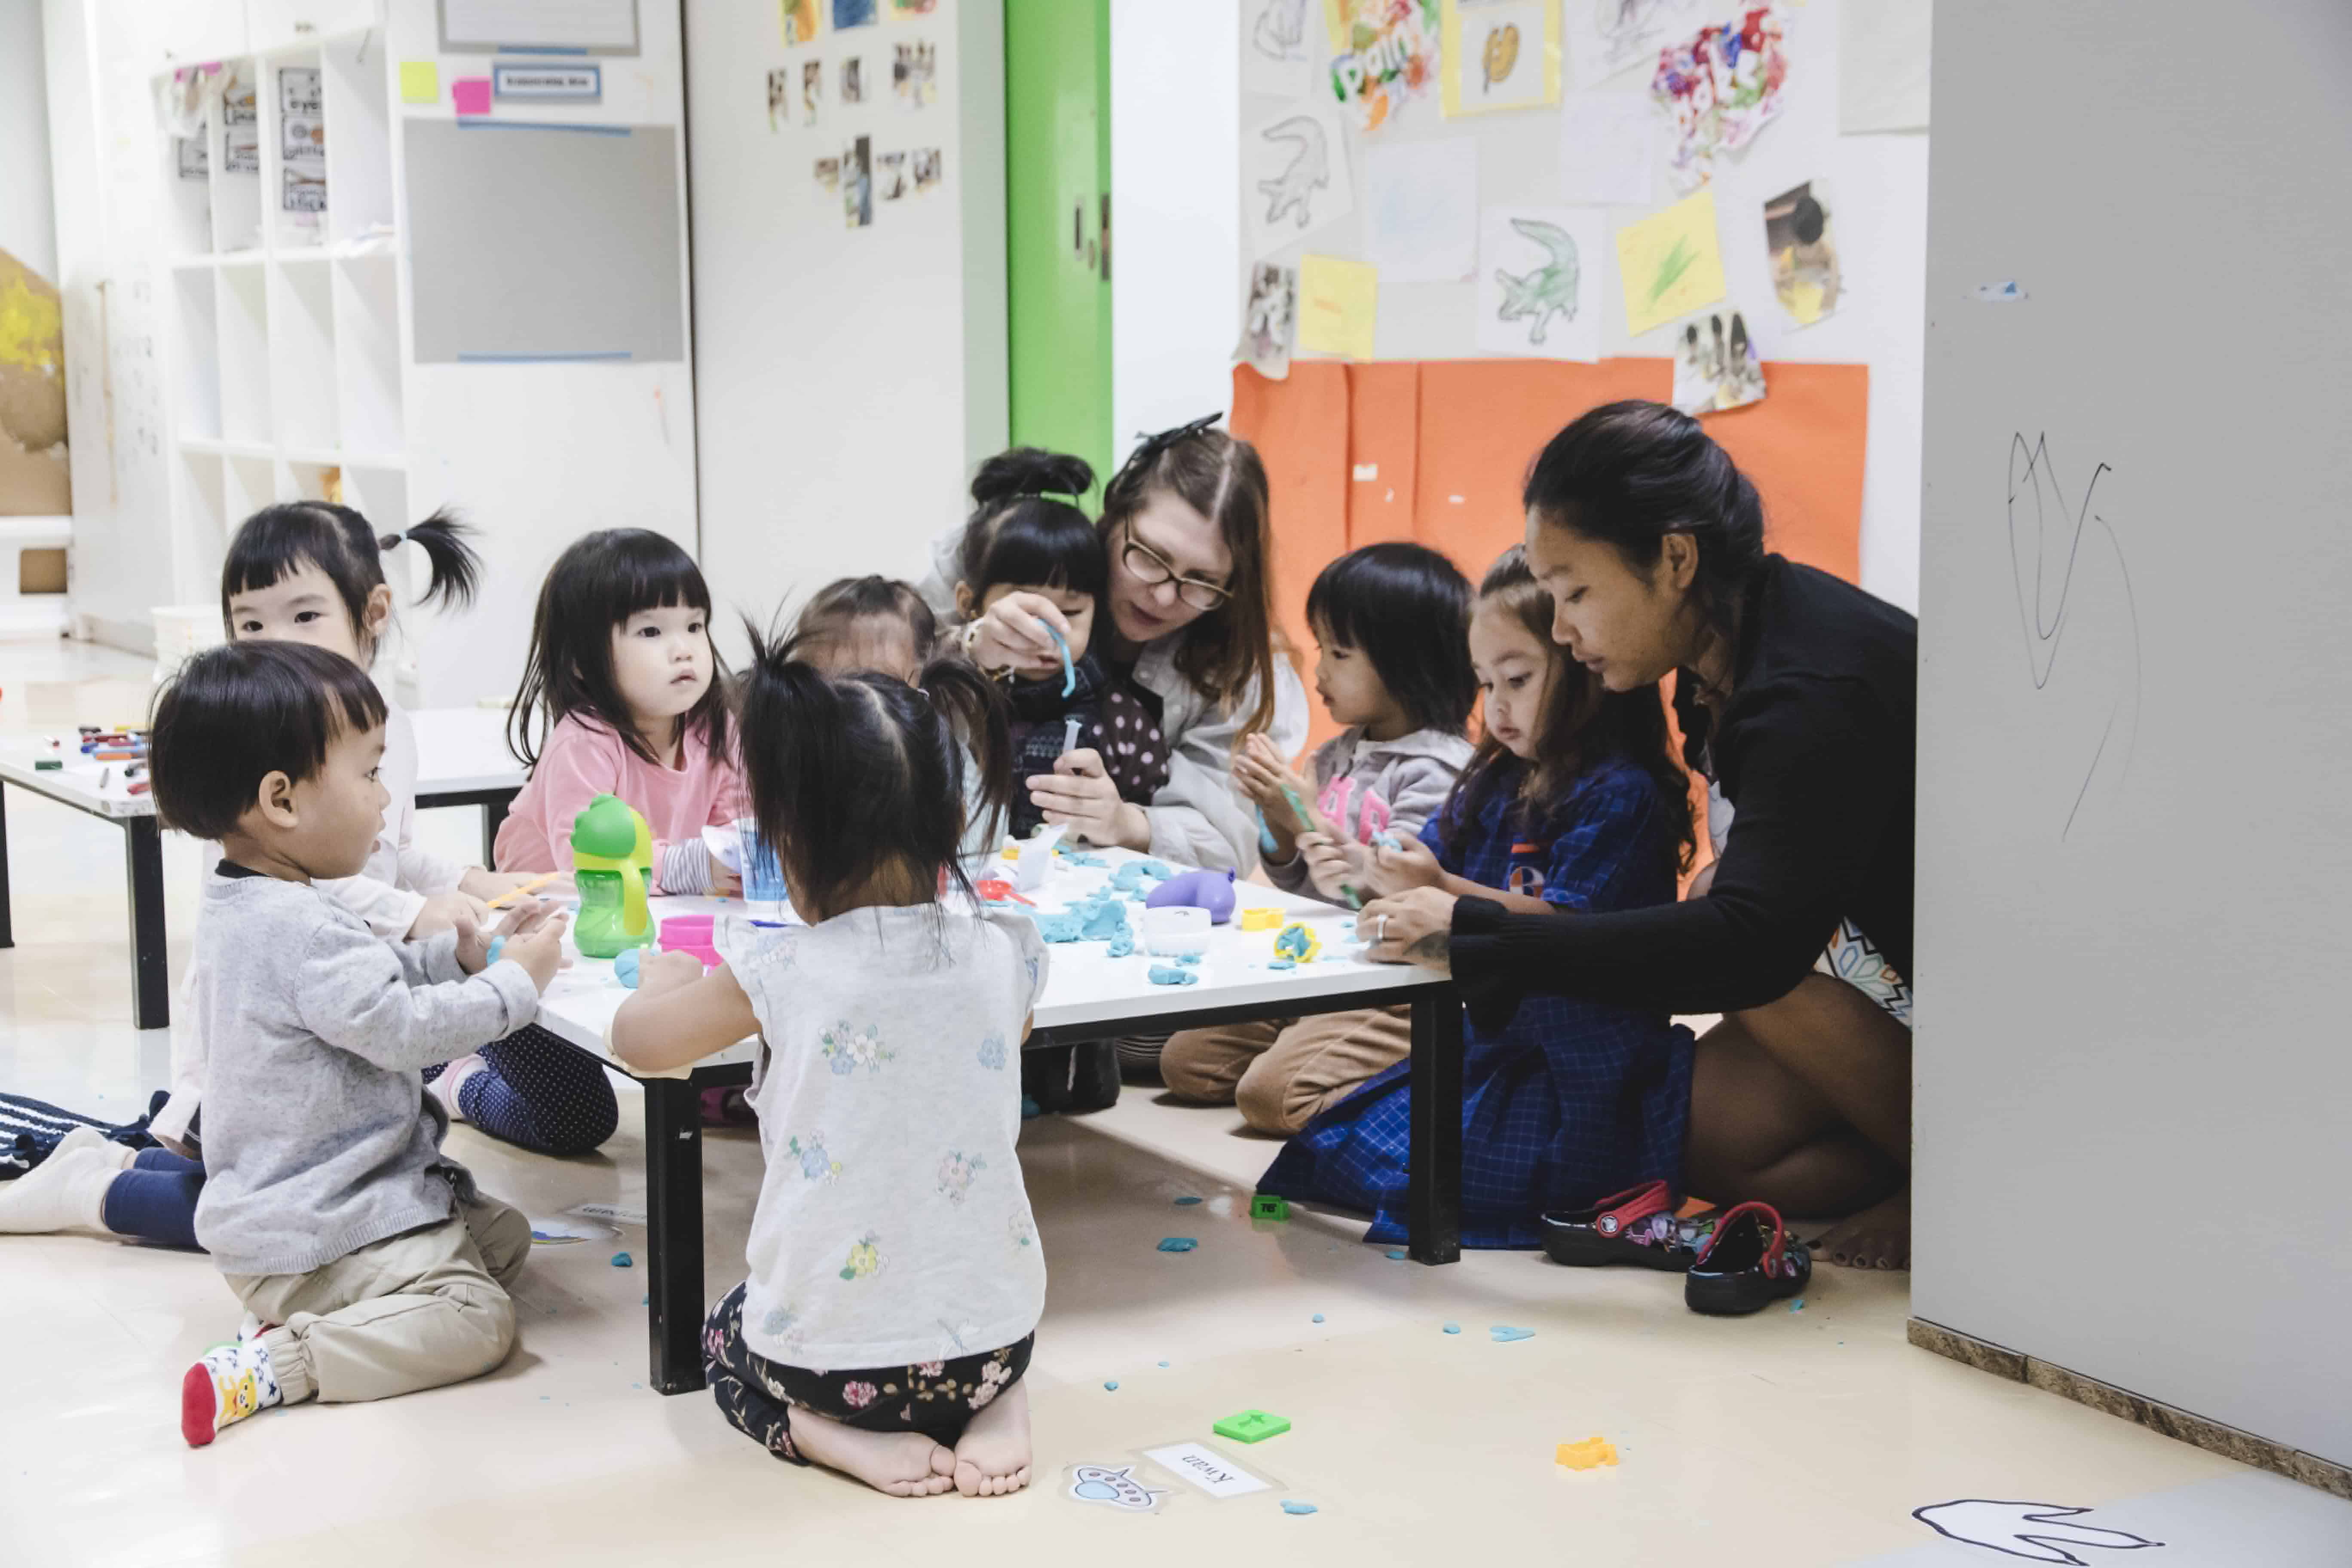 "Children in the Early Childhood programme at Satit Bilingual School of Rangsit University (Thailand)"